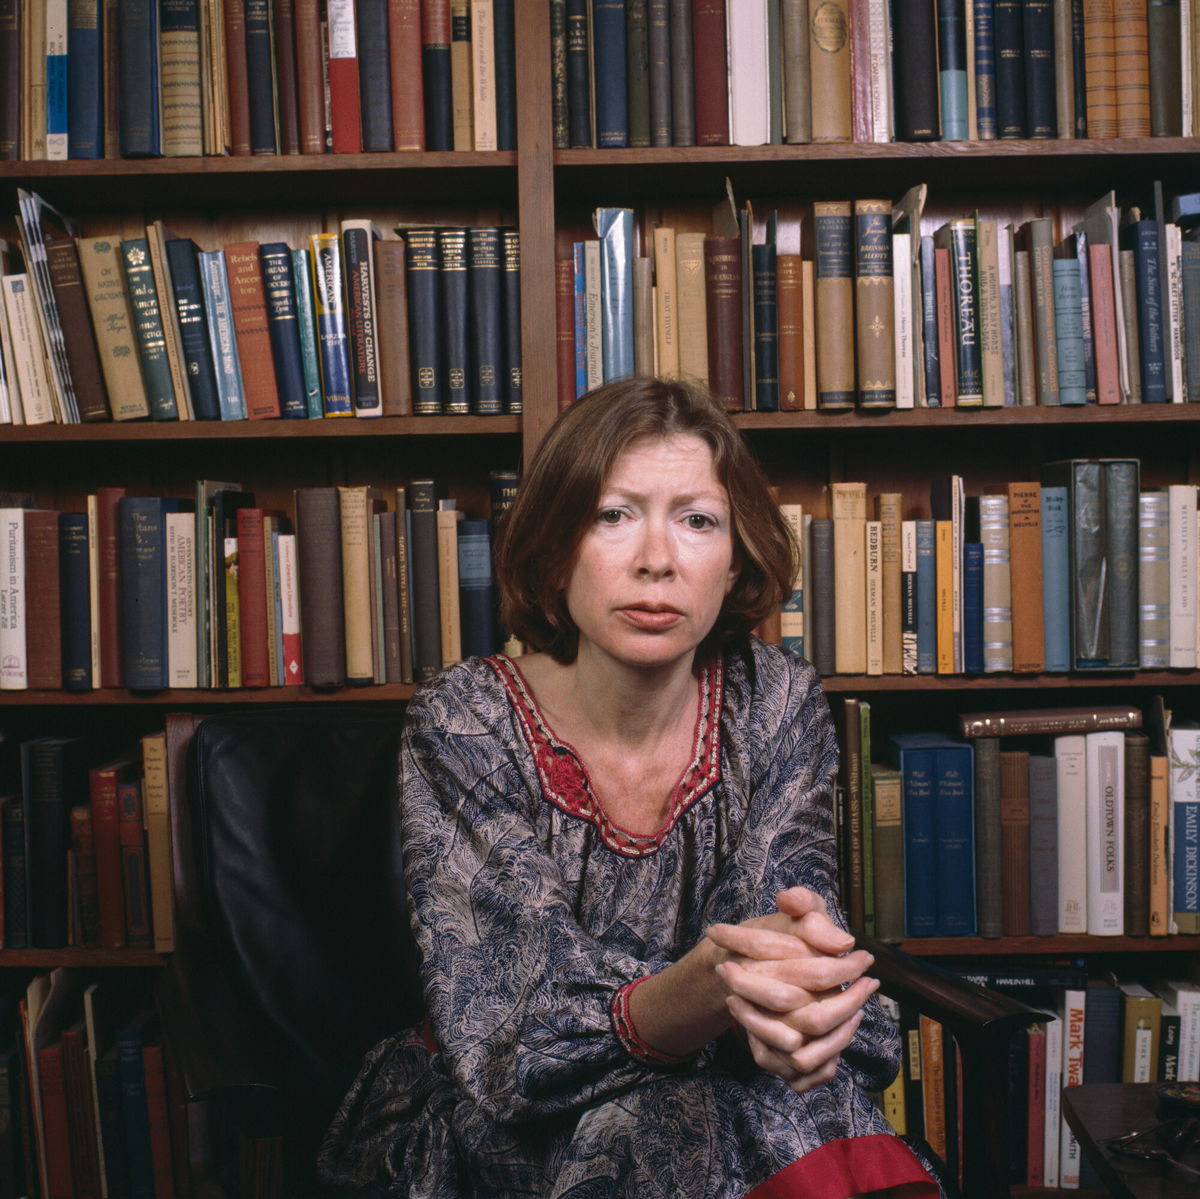 <i>Janet Fries/Hulton Archive/Getty Images</i><br/>Famed American essayist and novelist Joan Didion